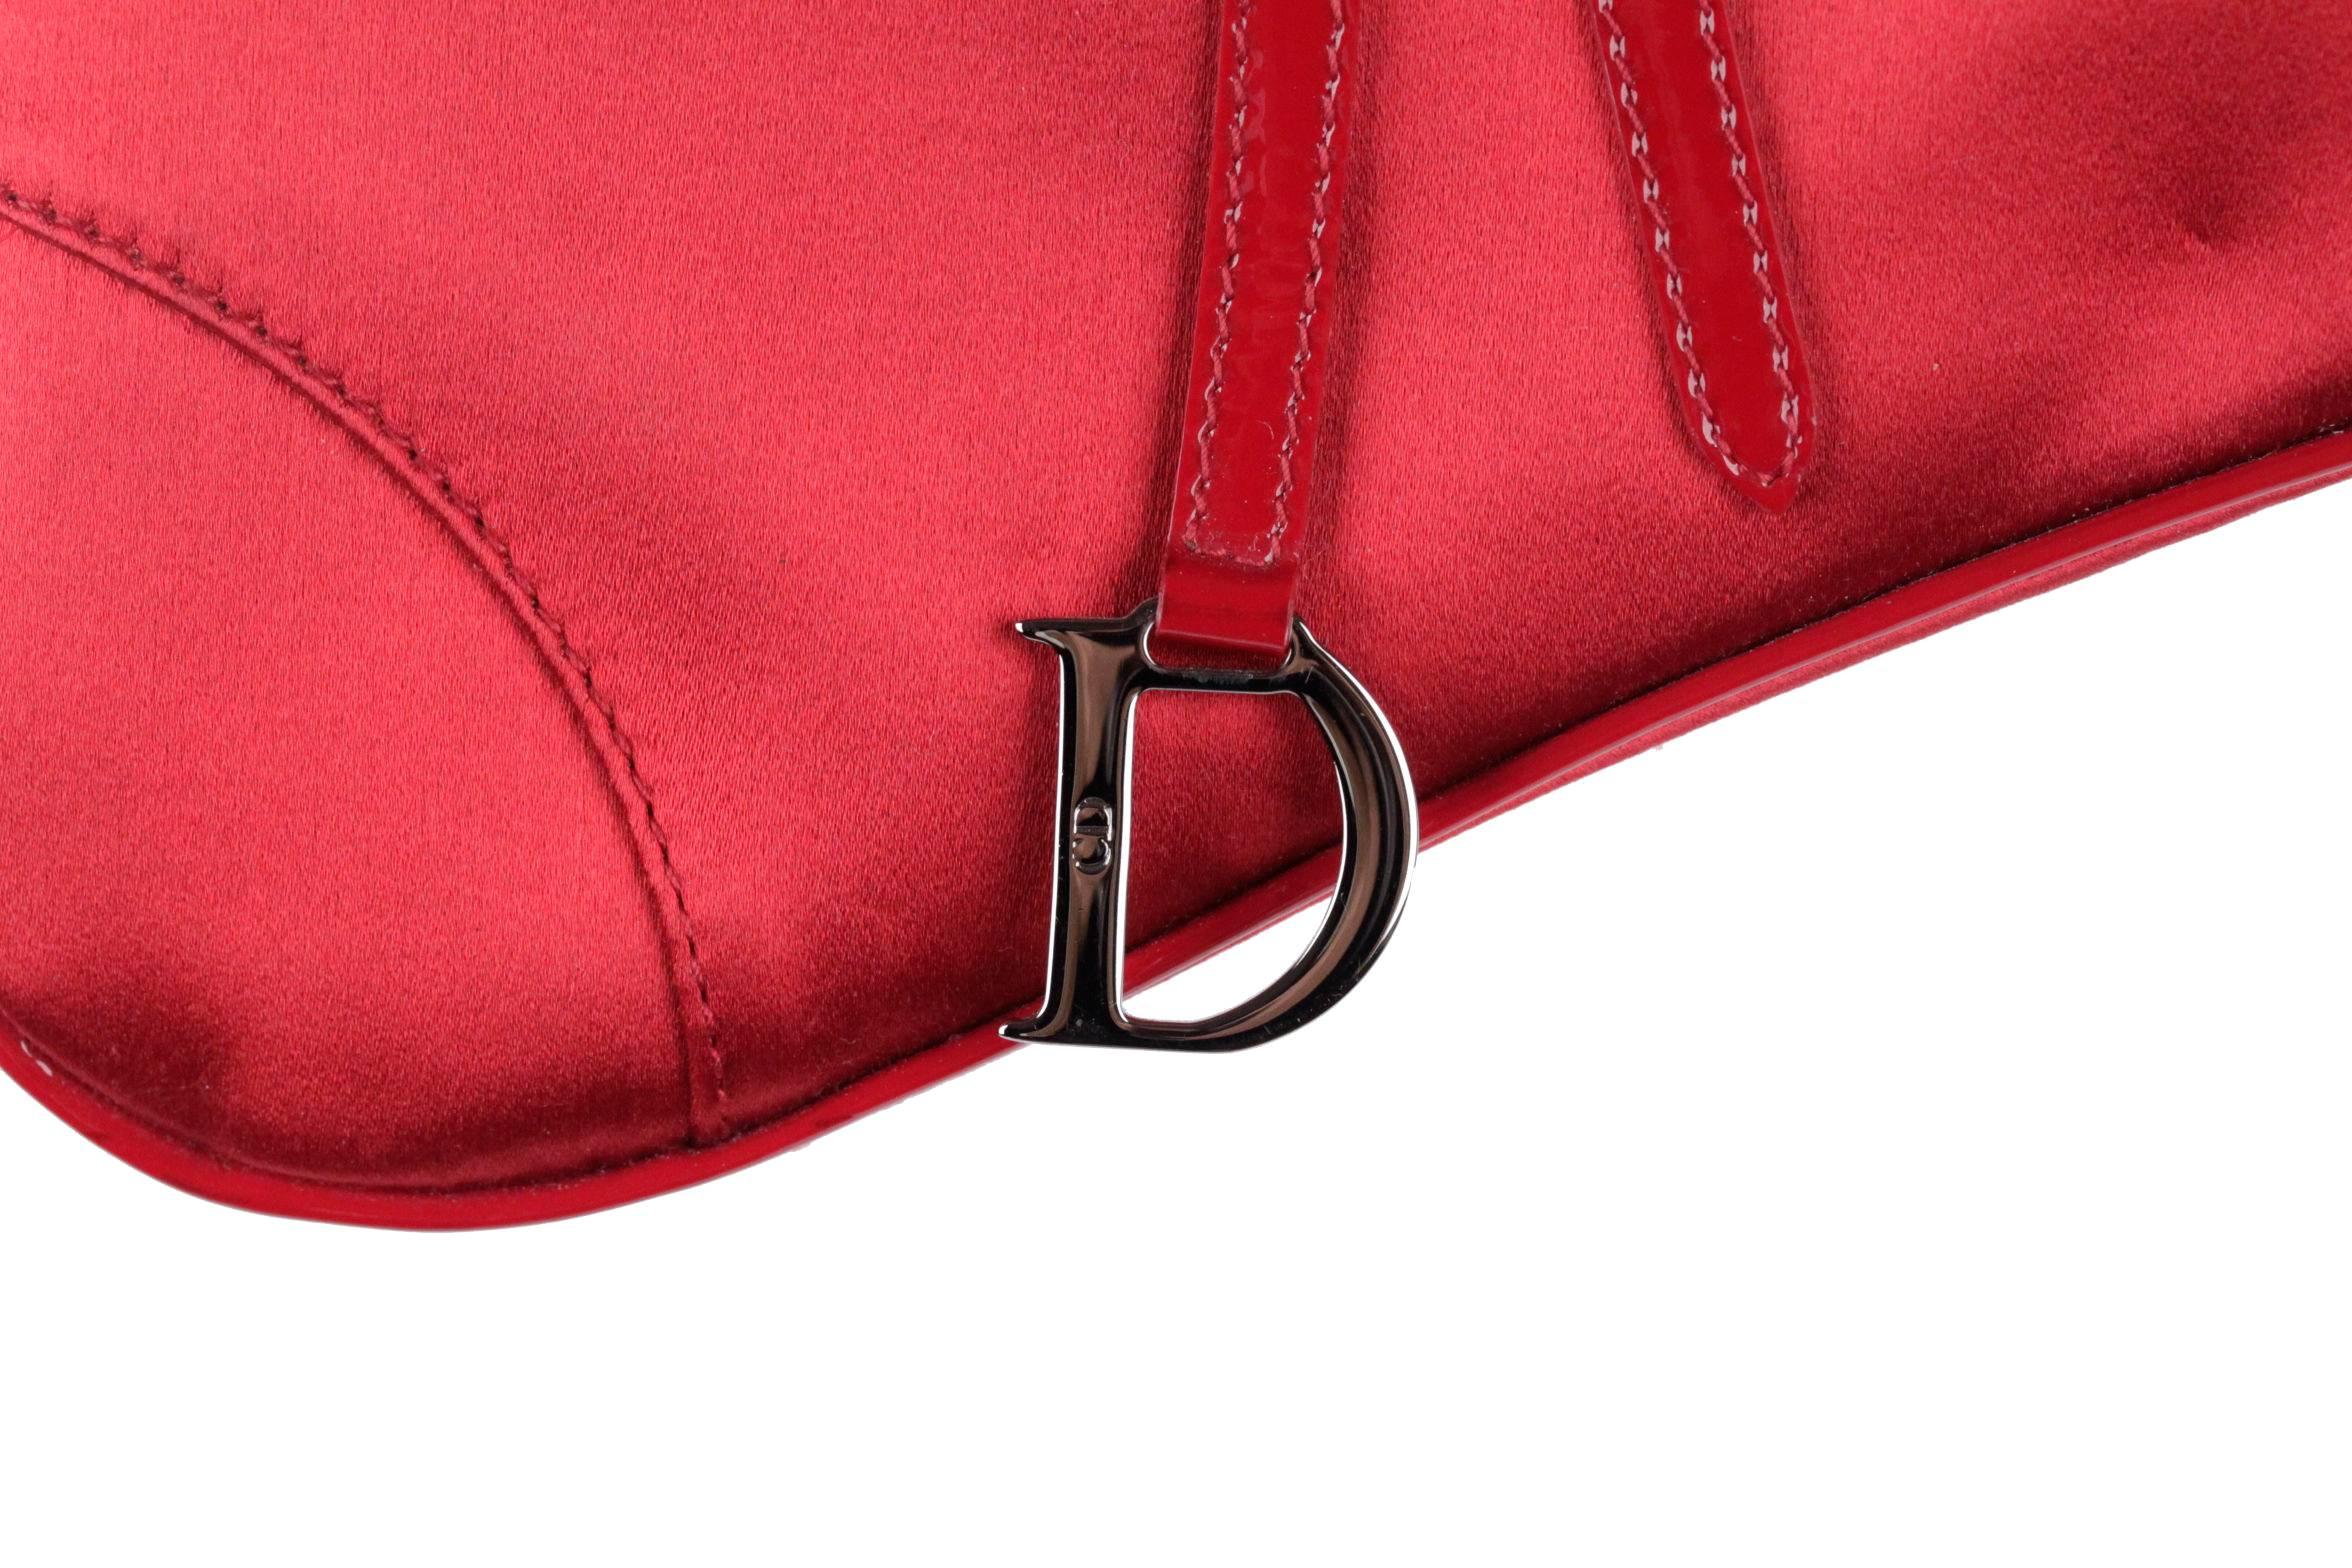  - Christian Dior Mini Evening Saddle Bag in red satin
- Really lovely and unique, perfect for special evenings or black tie affairs
- Silver framed opening
- Push lock at side
- Trimmed with black patent leather piping and details
- The single